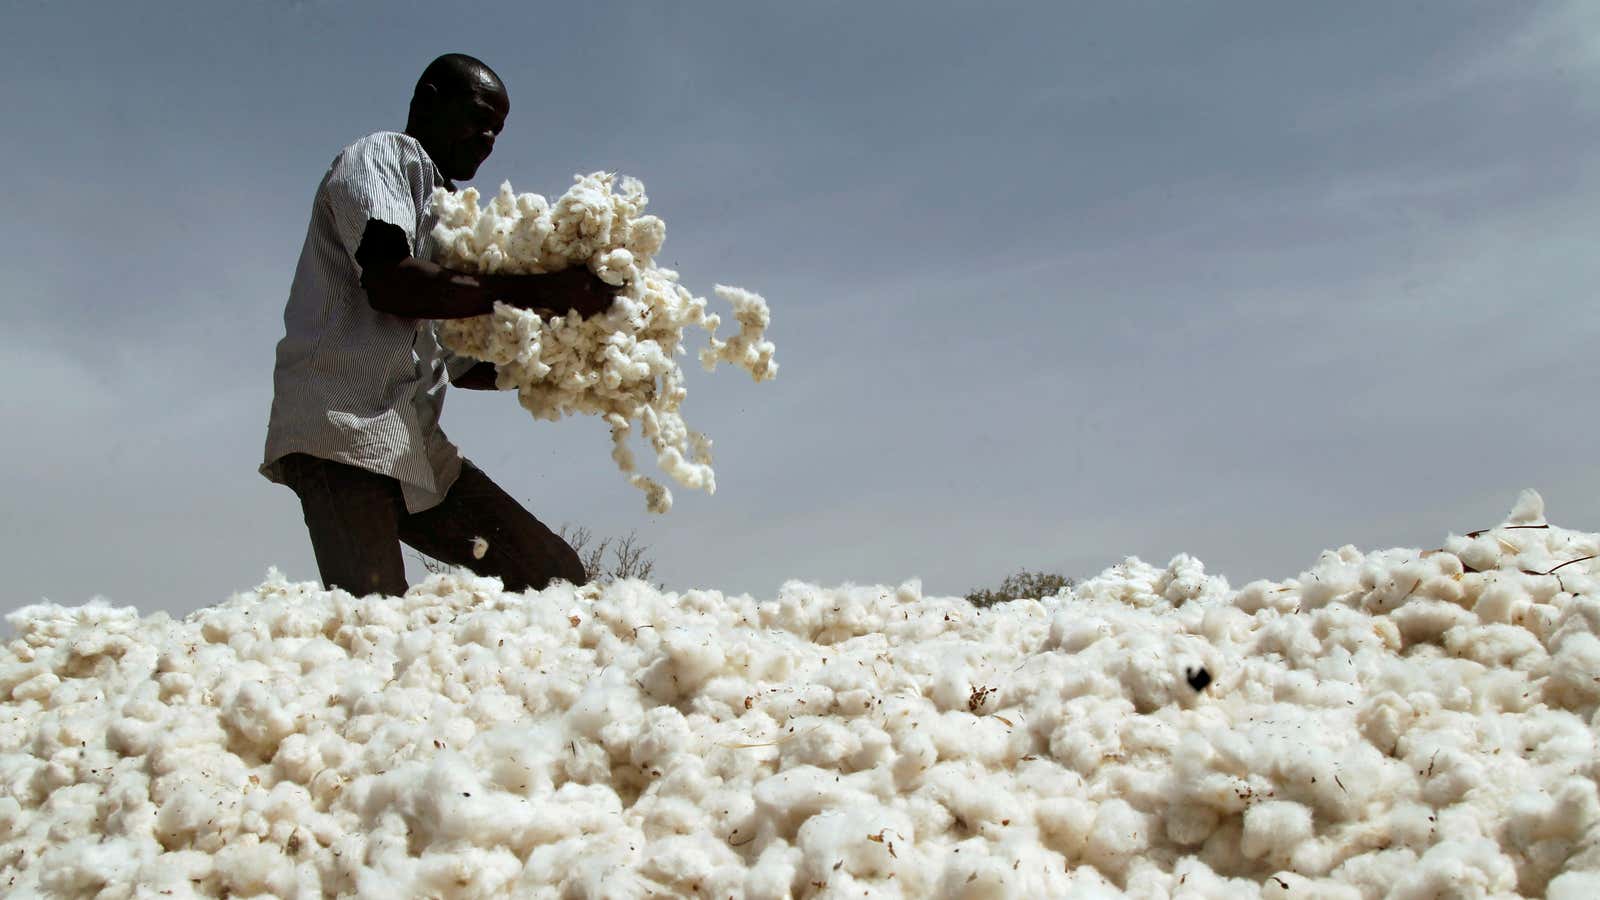 Brazil's Expertise to Boost East Africa Cotton Farming – UNOSSC